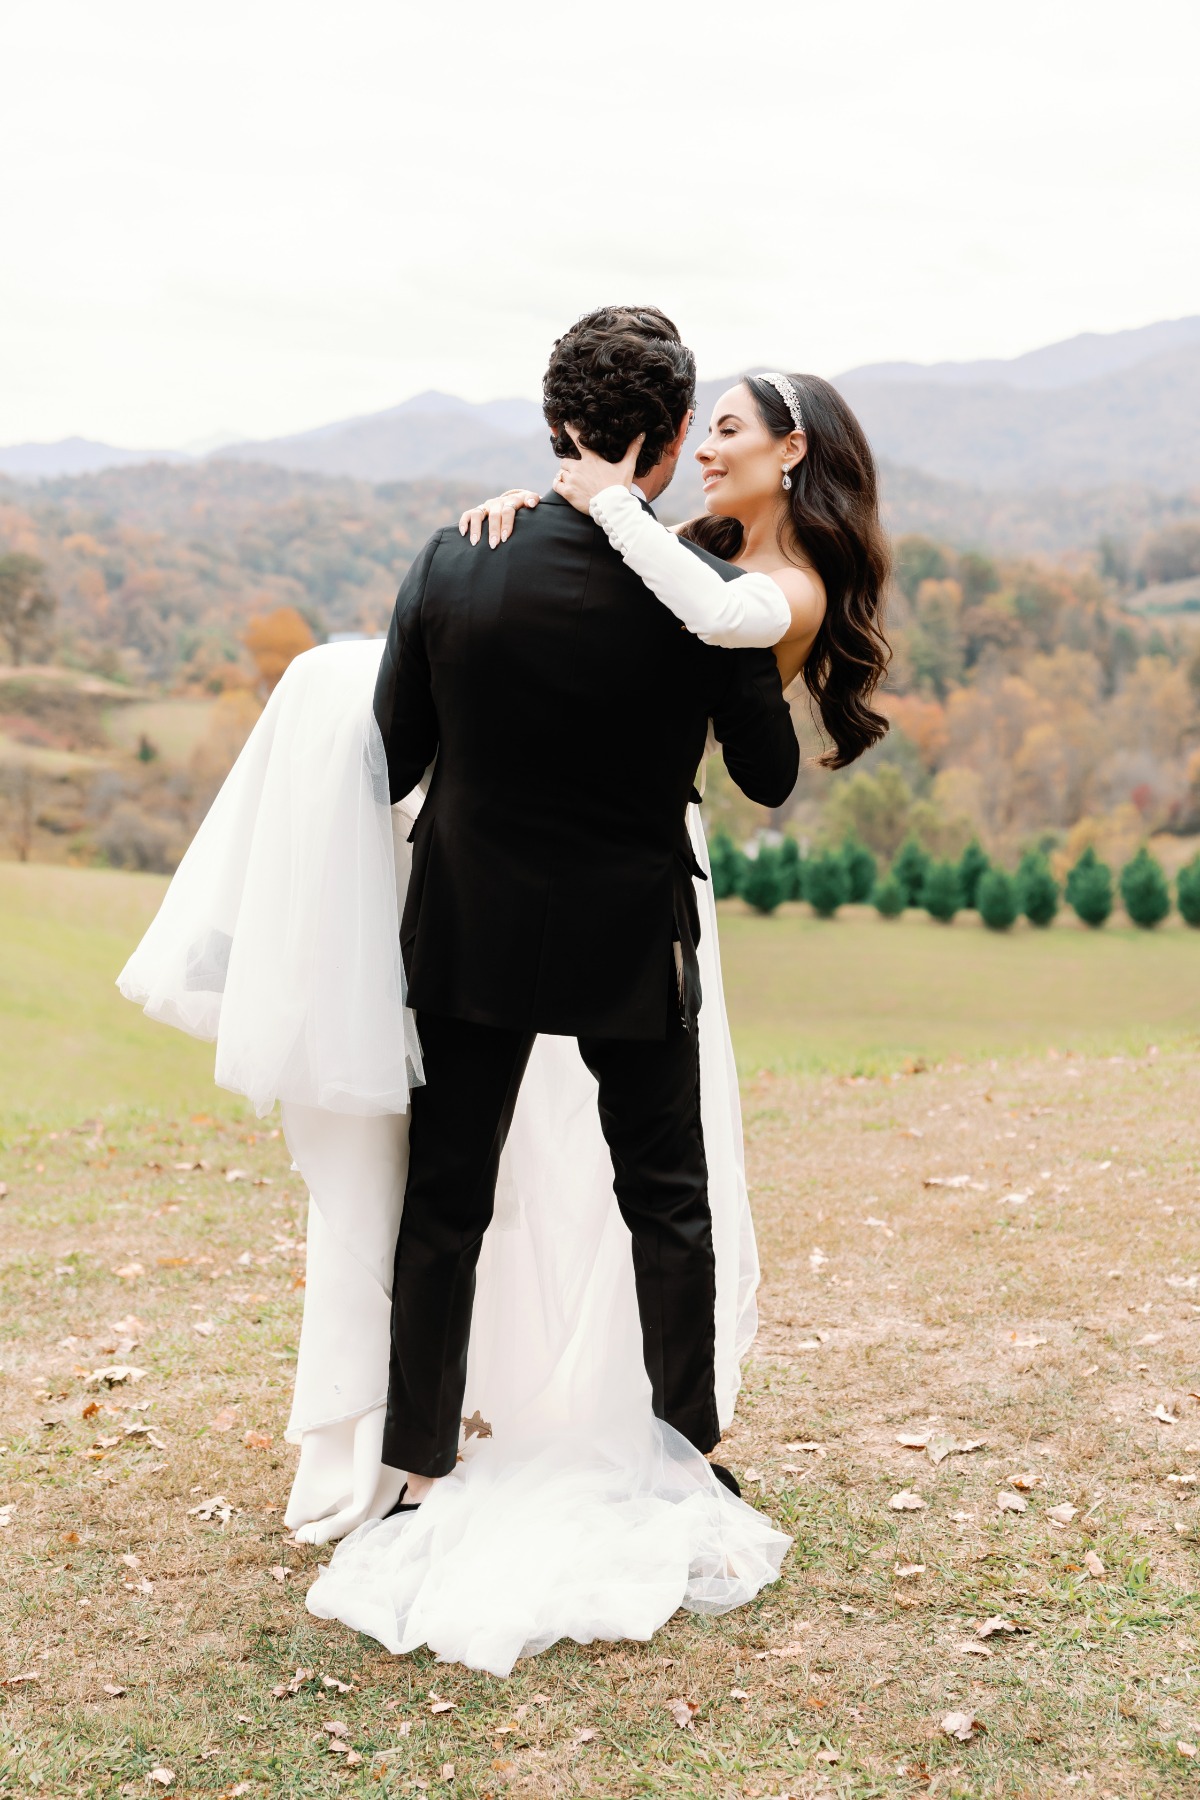 Groom carrying bride at dreamy outdoor fall wedding 